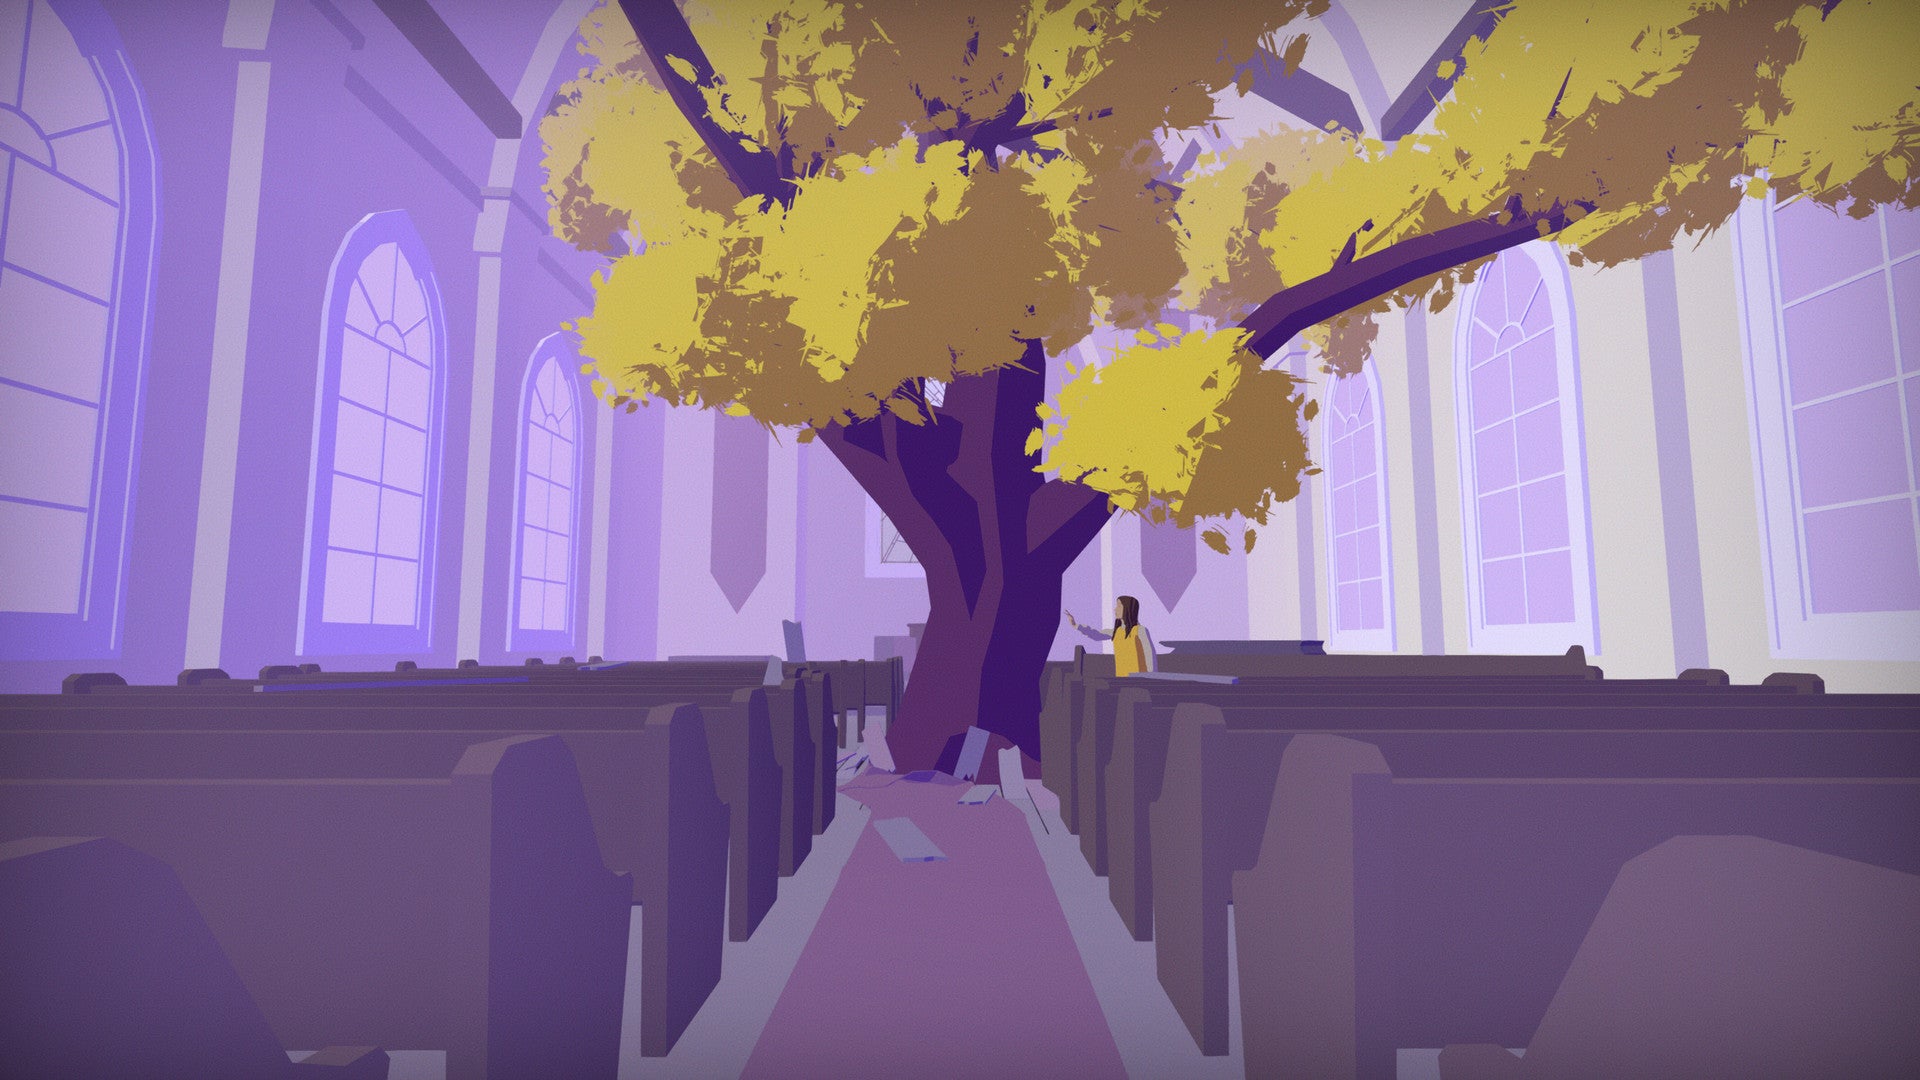 The interior looks like a church, with a tinge of purple. But in the middle of where the podium was, there was a huge tree.